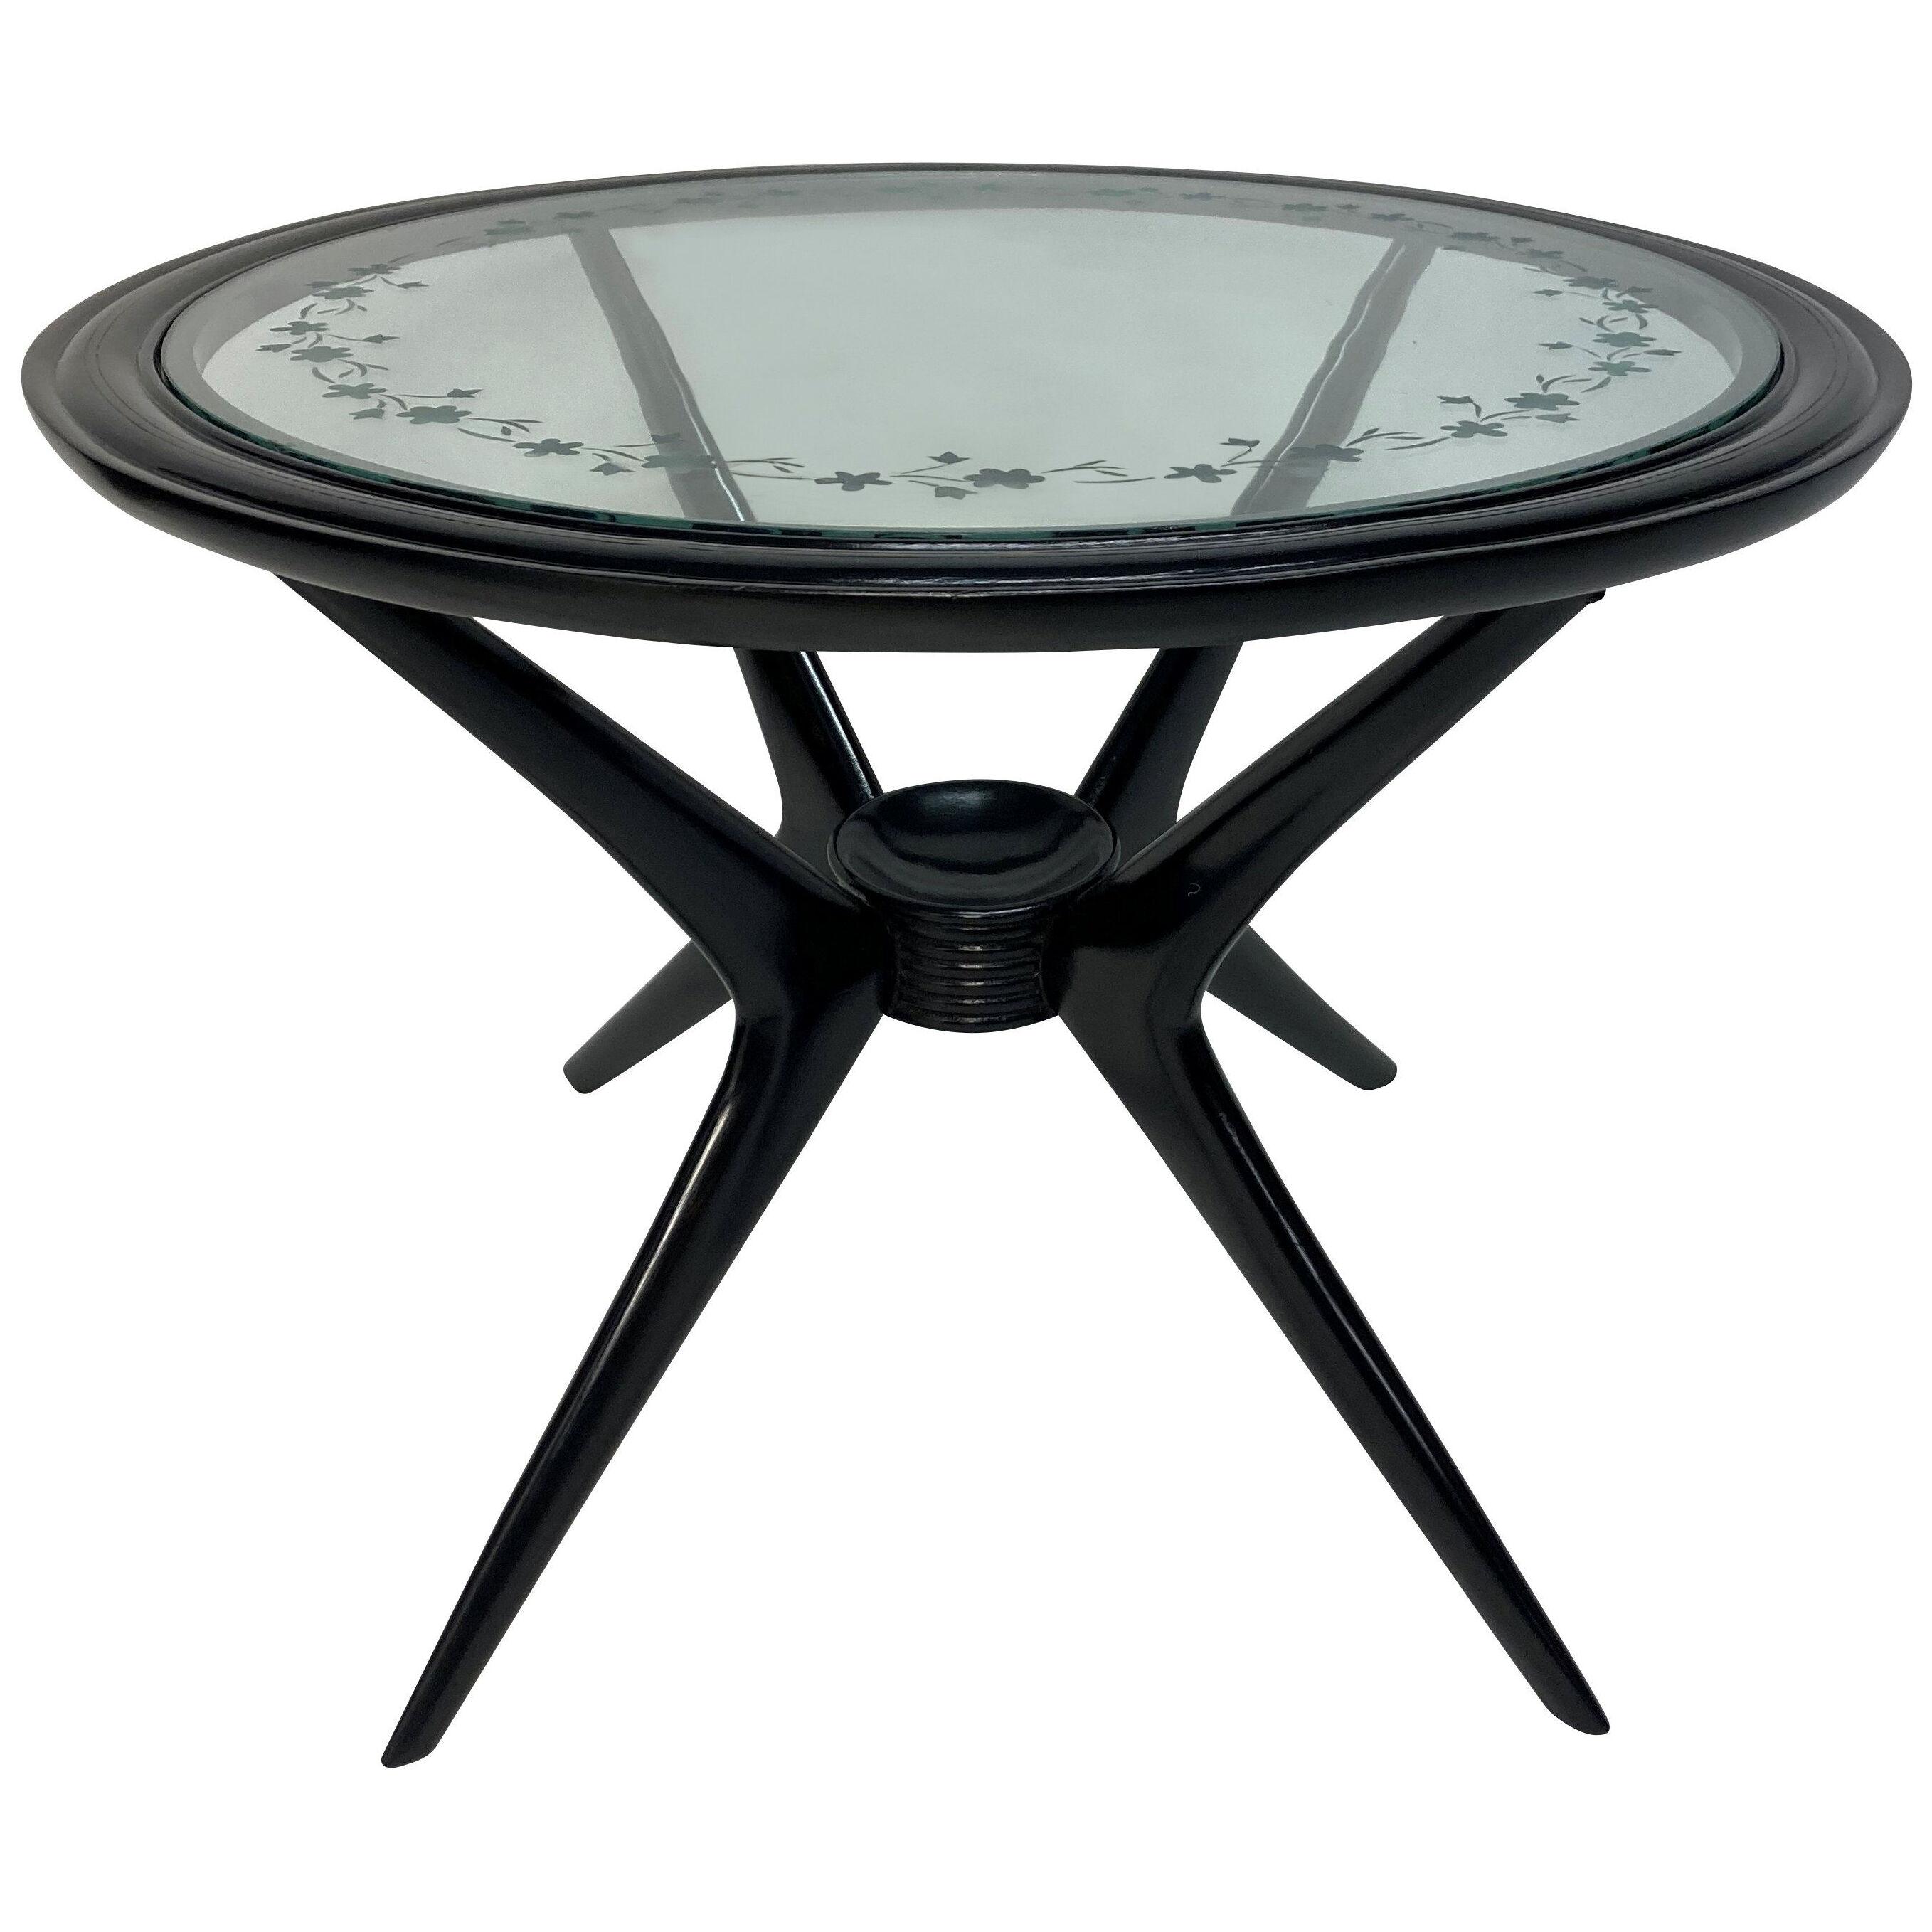 AN ITALIAN CIRCULAR OCCASIONAL TABLE BY CASSINA